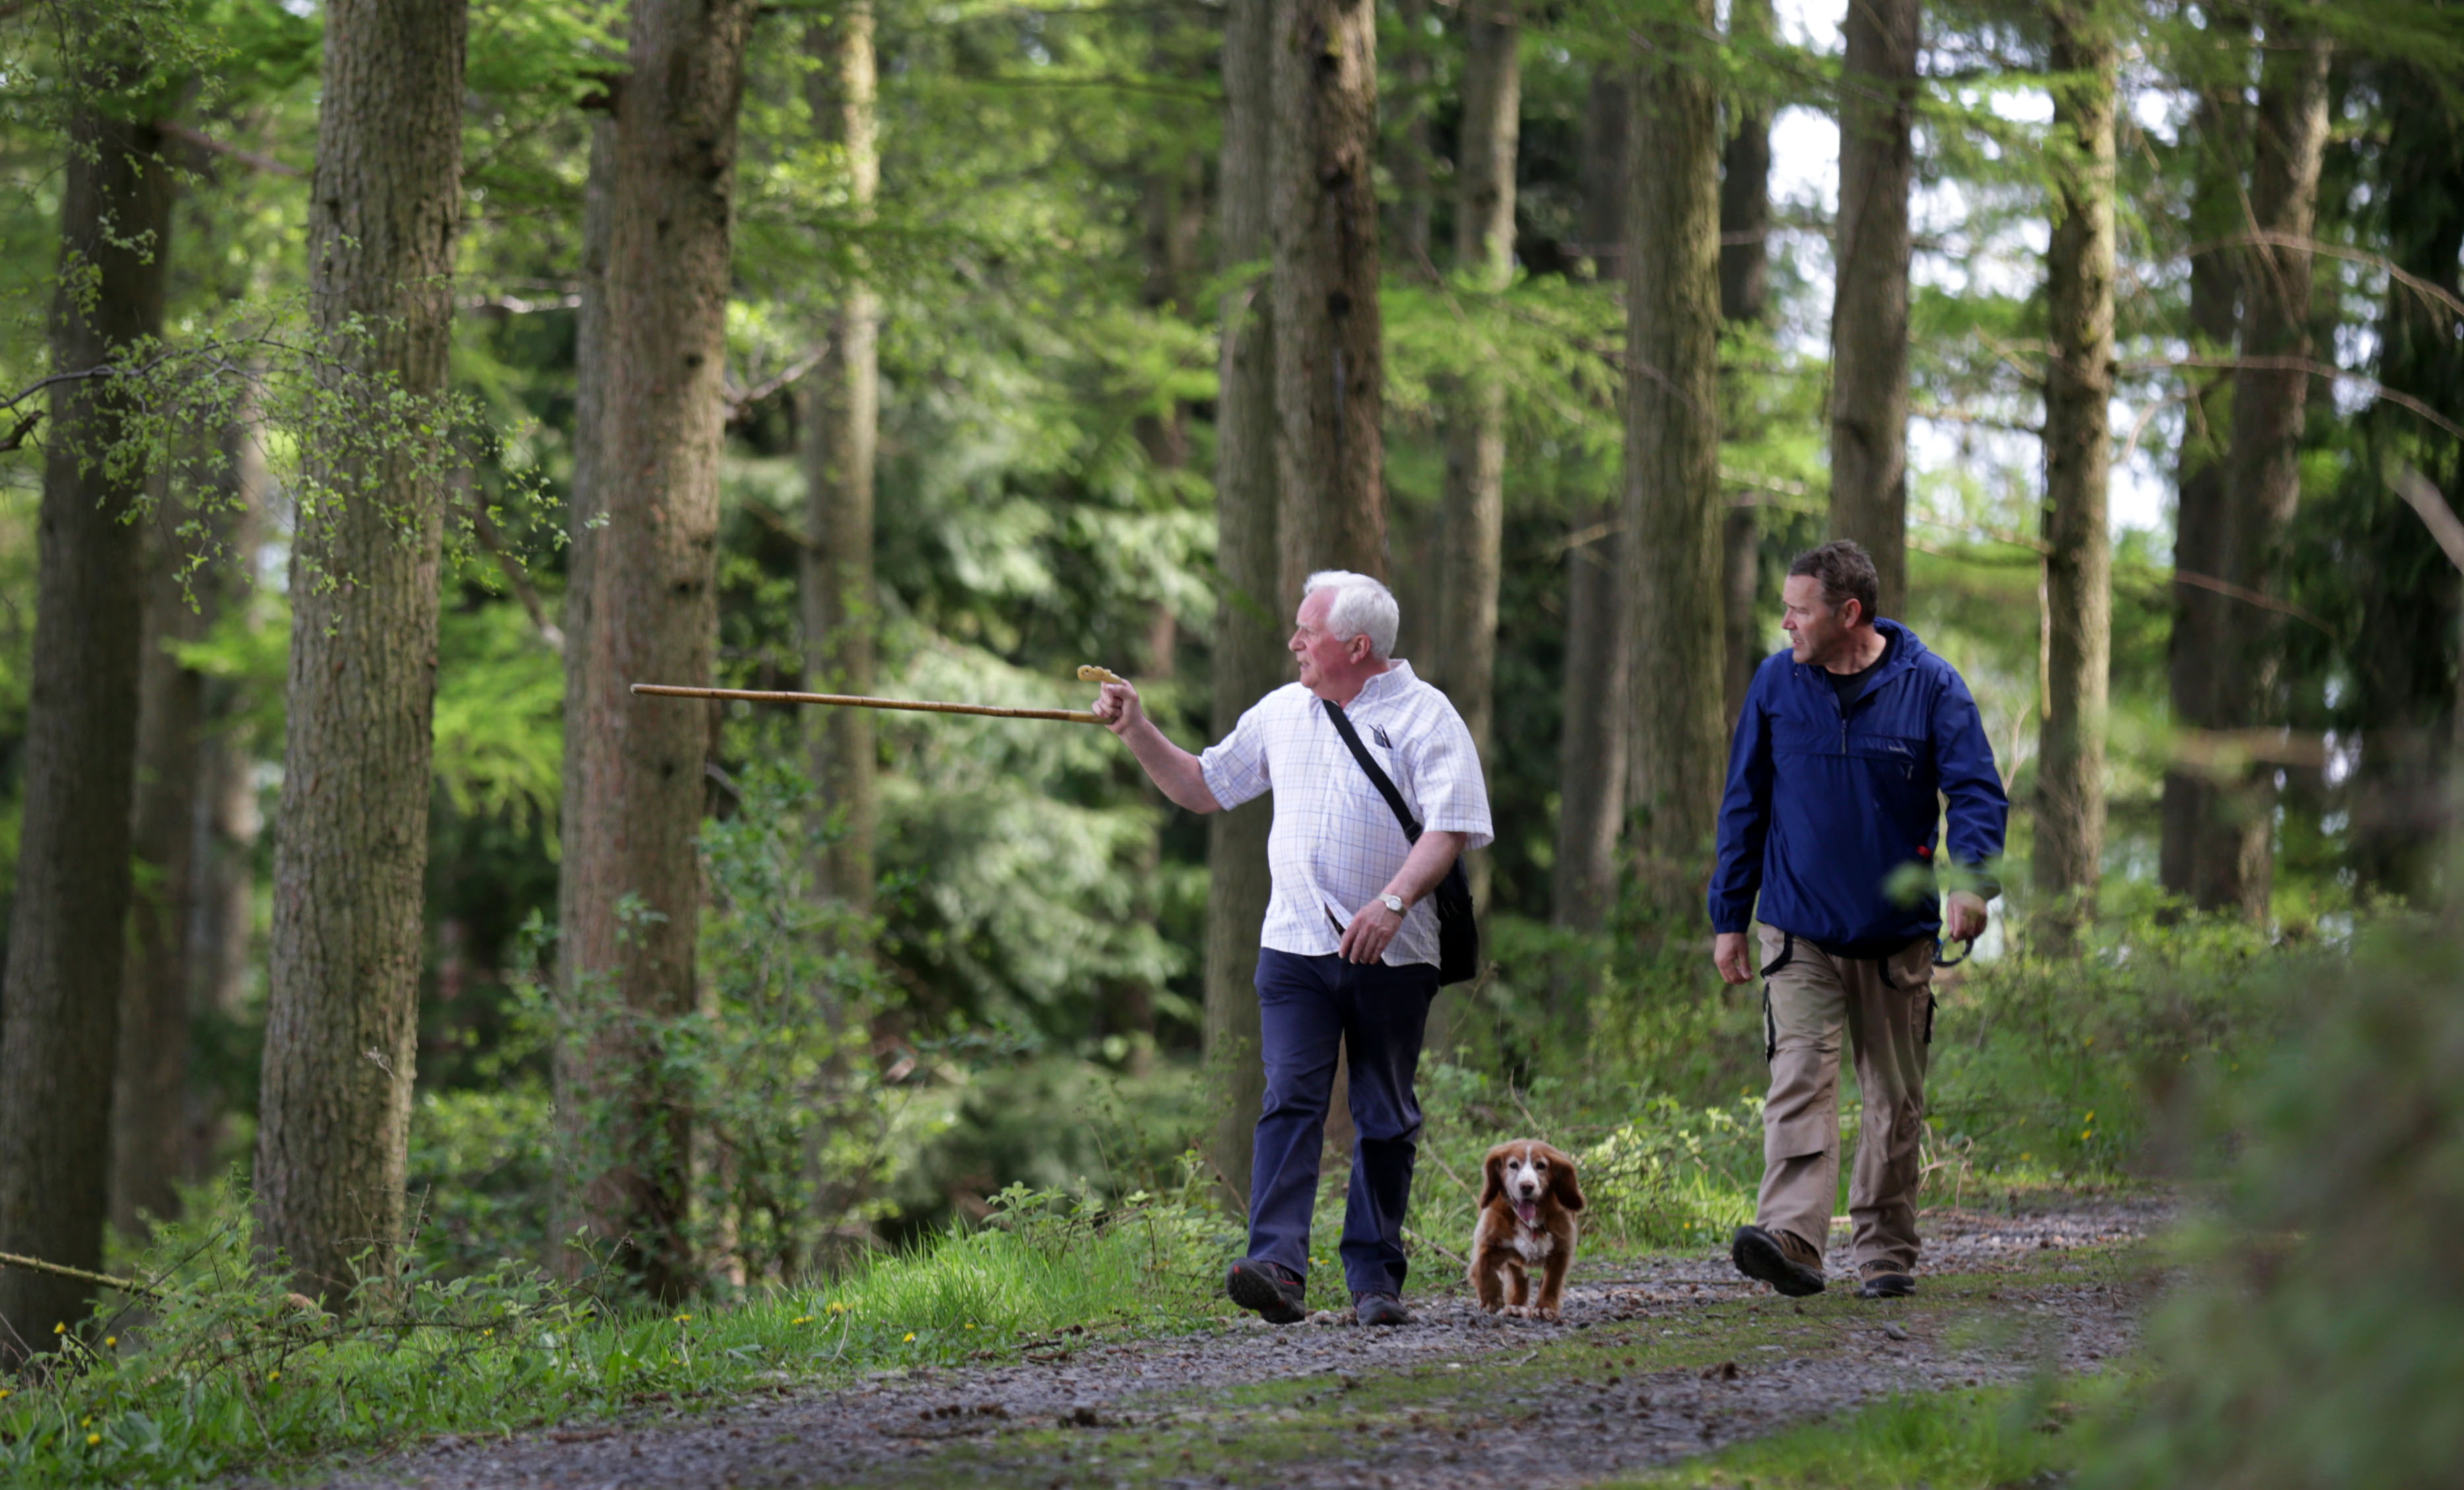 A mature man and a young man walk along a forest road with a dog, Mabie Forest, near Dumfris, Solway Coast.